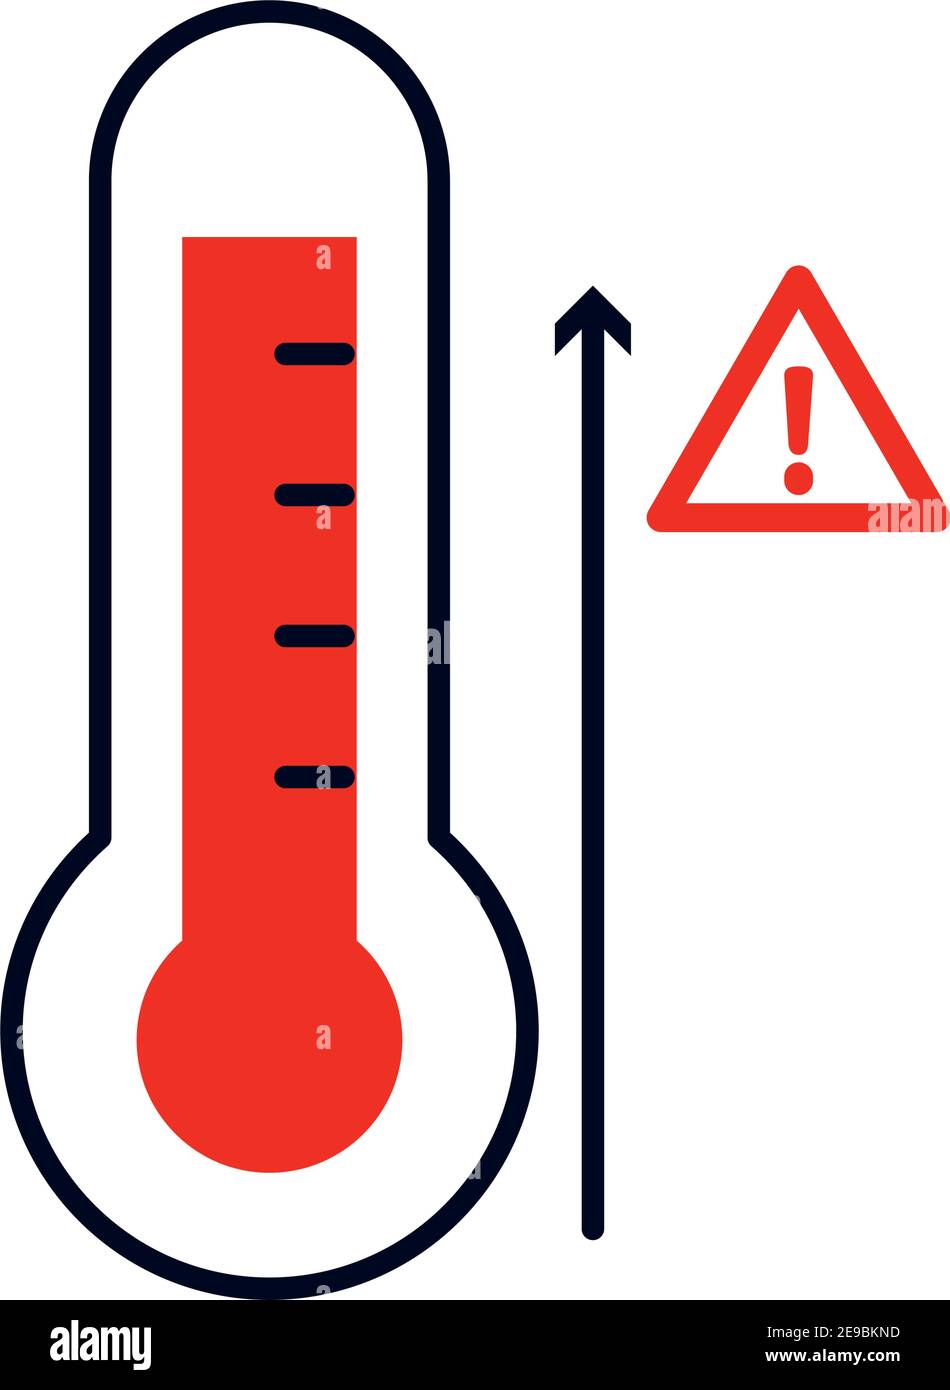 Thermometer with high temp stock vector. Illustration of measuring - 6751300